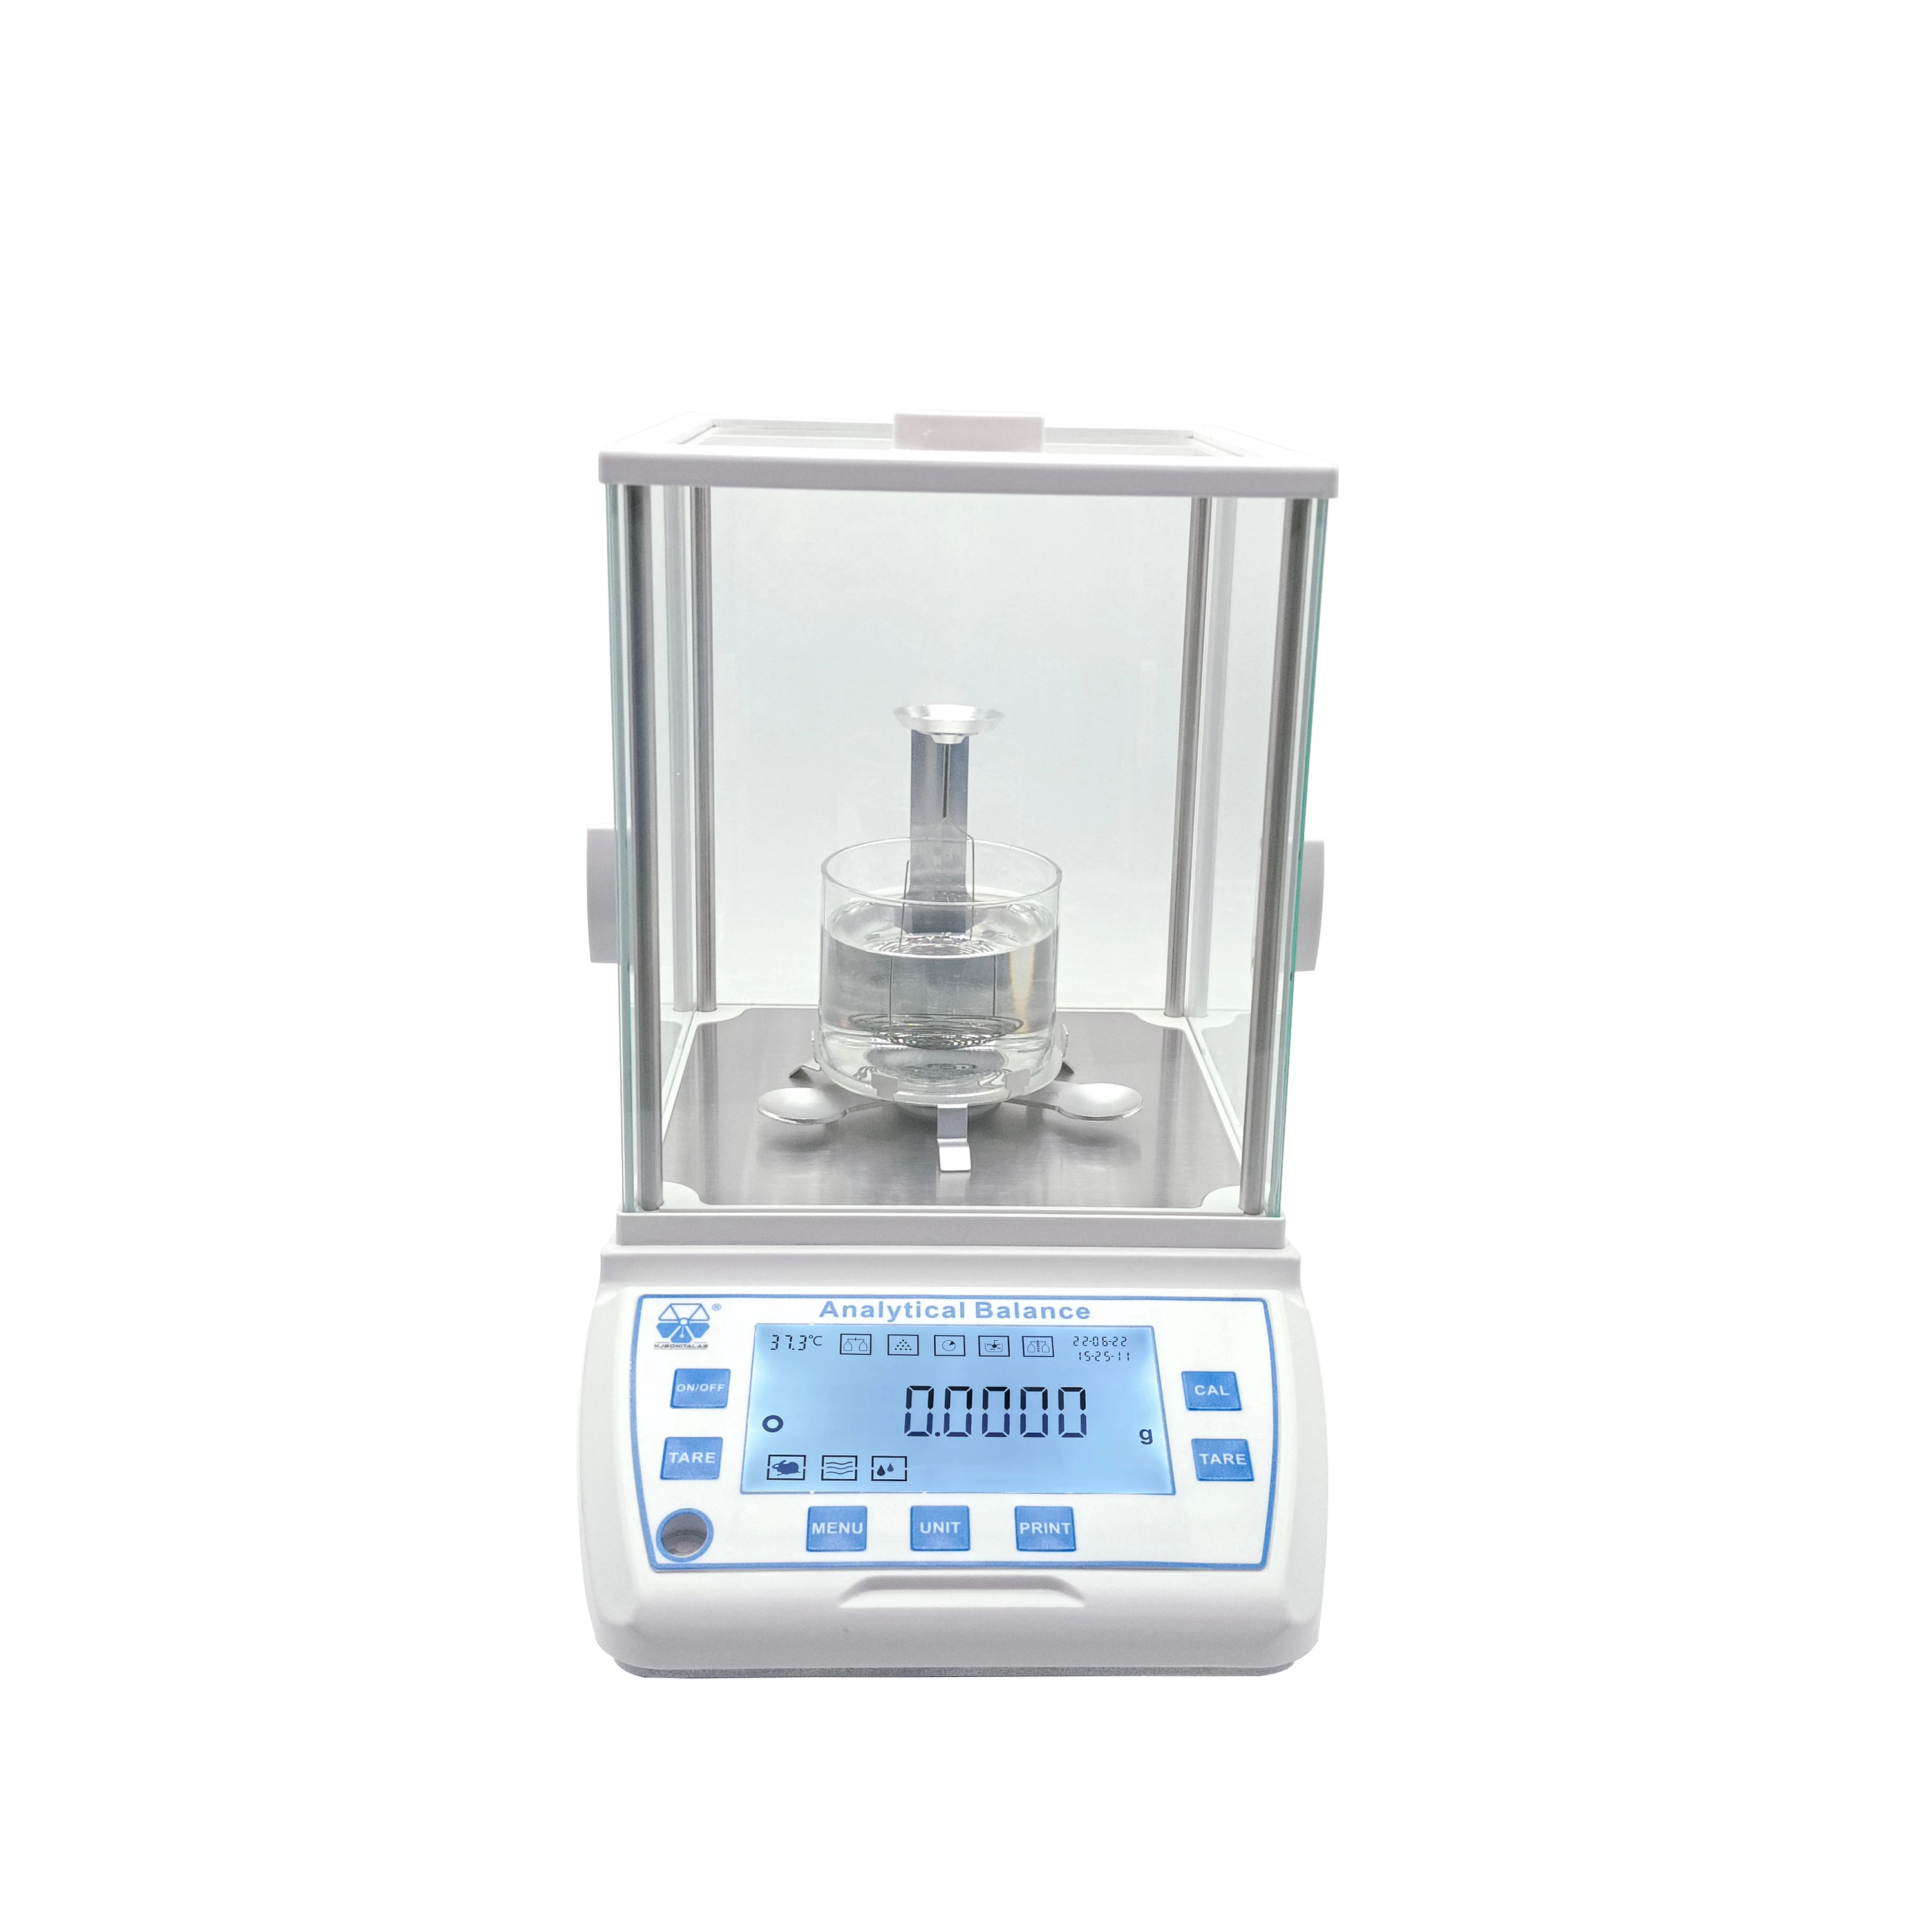 MTL-MD124 Density Measuring High Precision Electromagnetic Balance 0.0001g in Lab